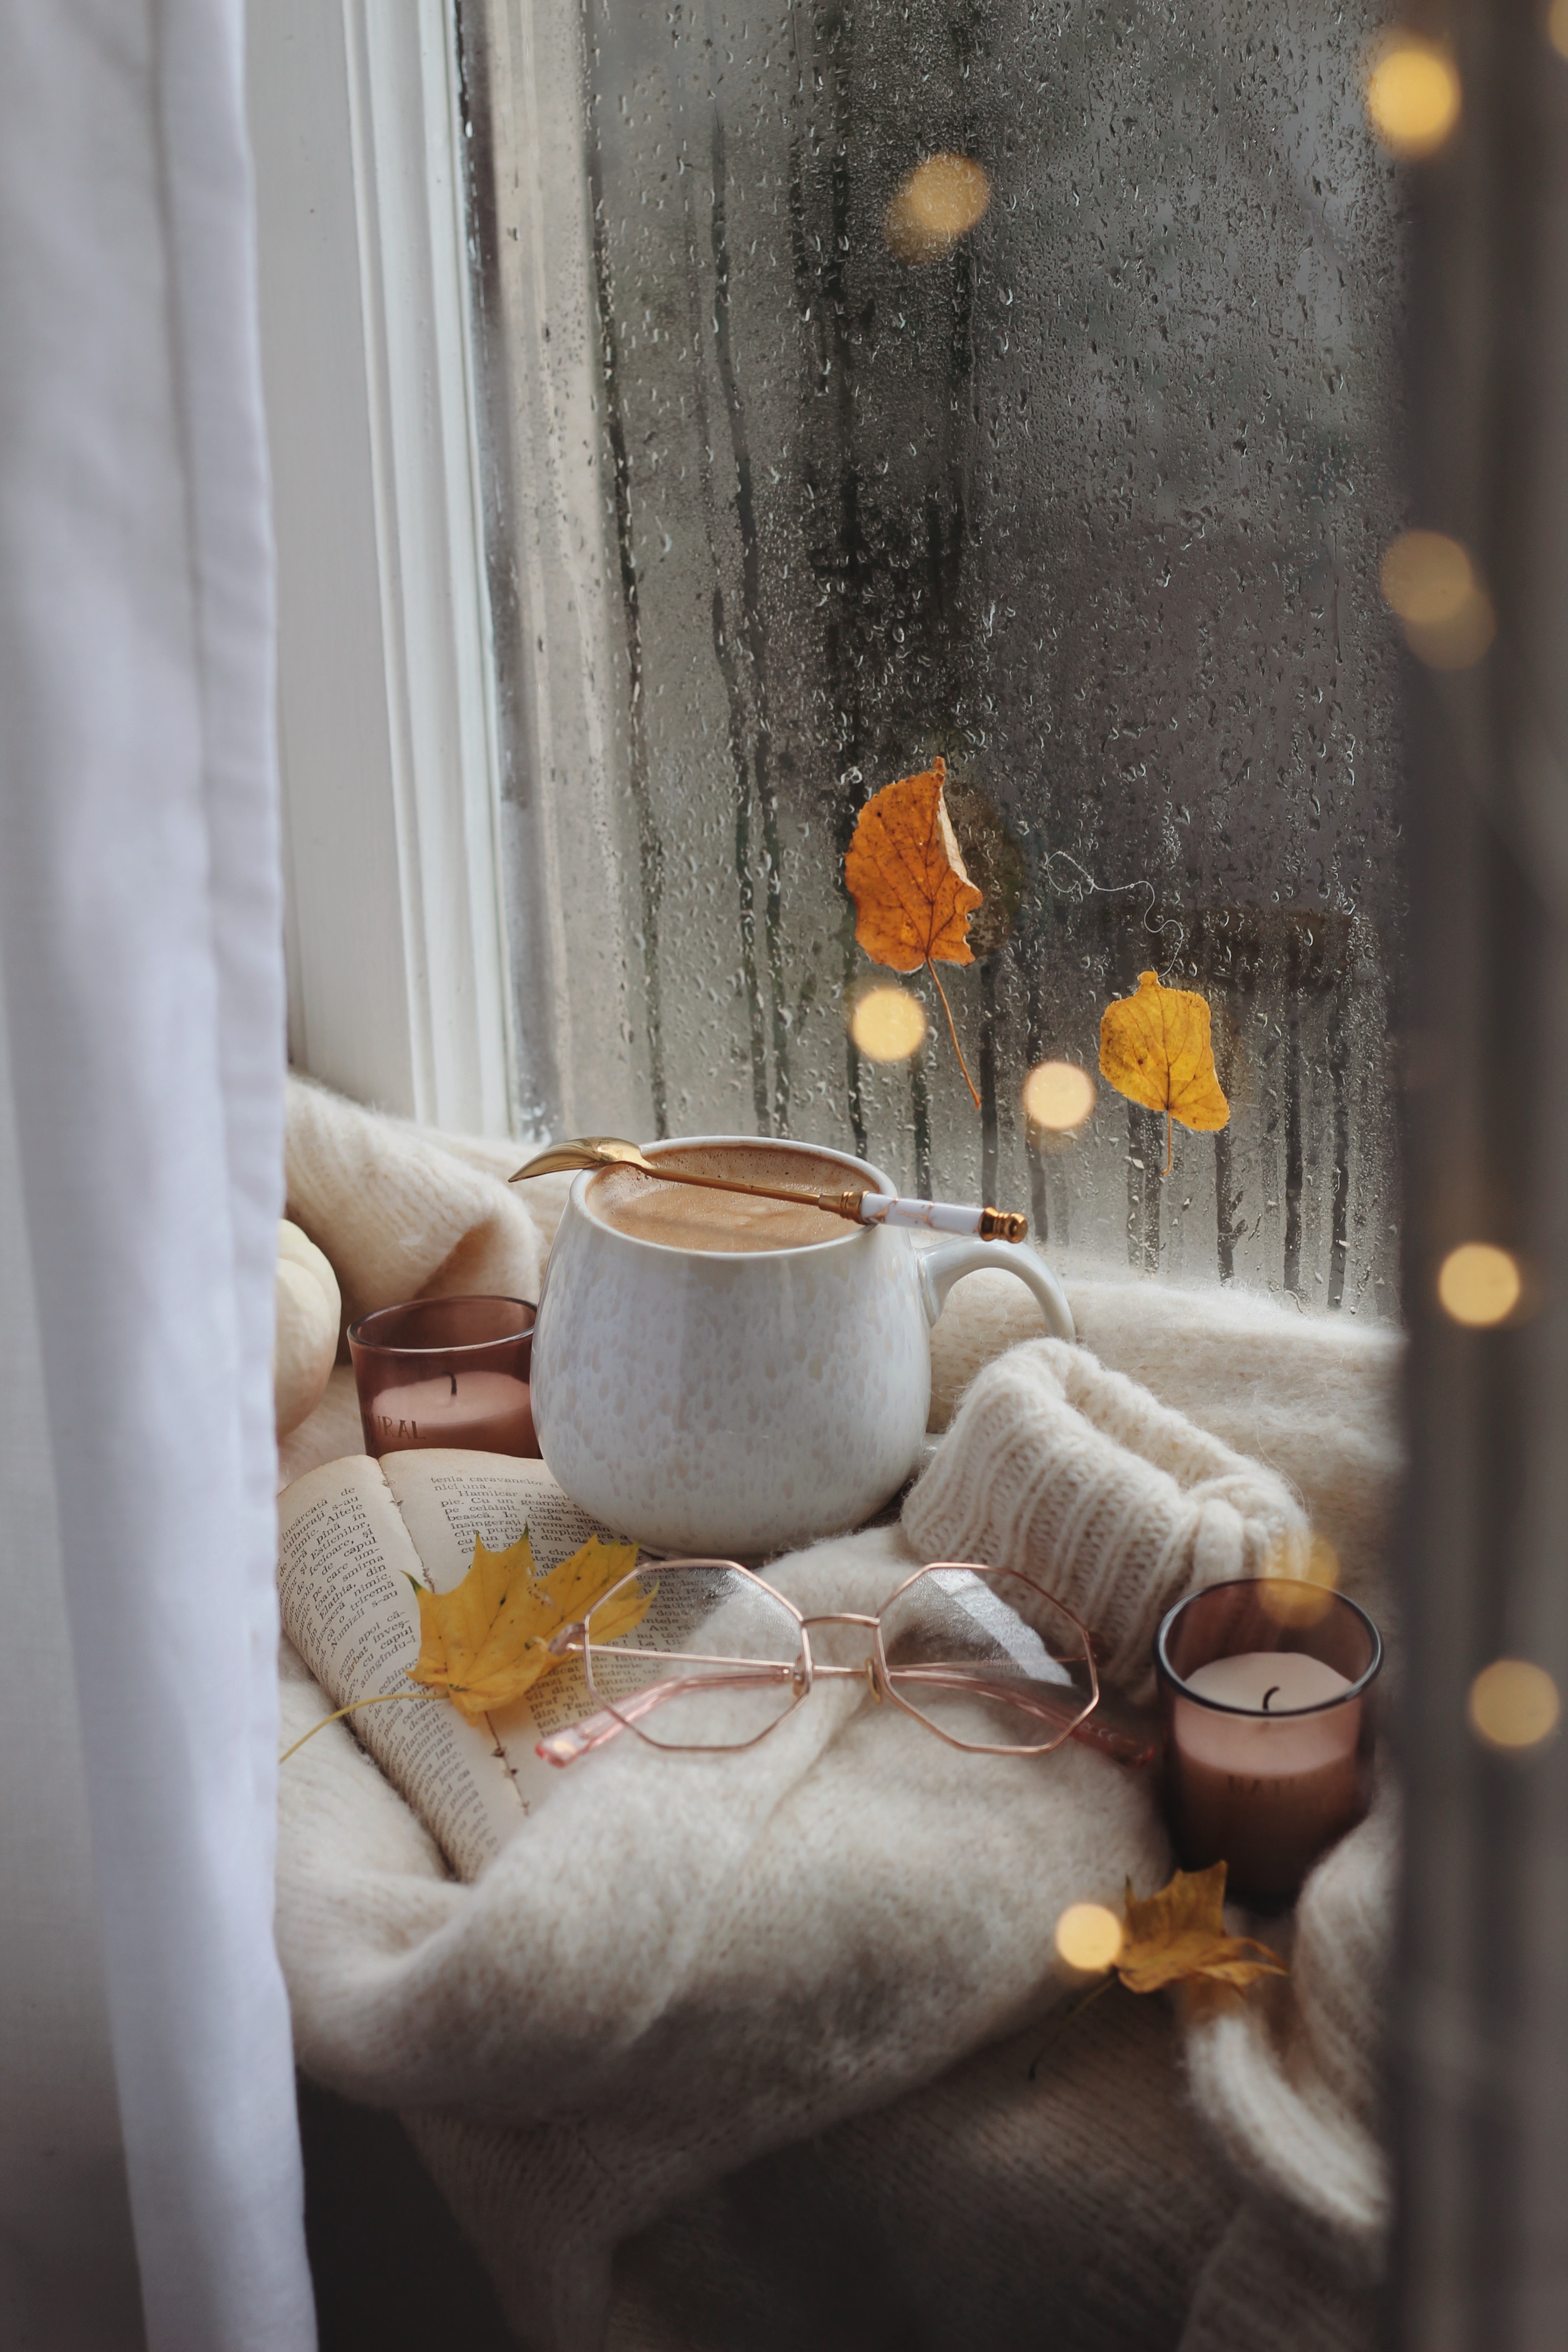 Coffee, glasses and sweater on book in autumn scene · Free